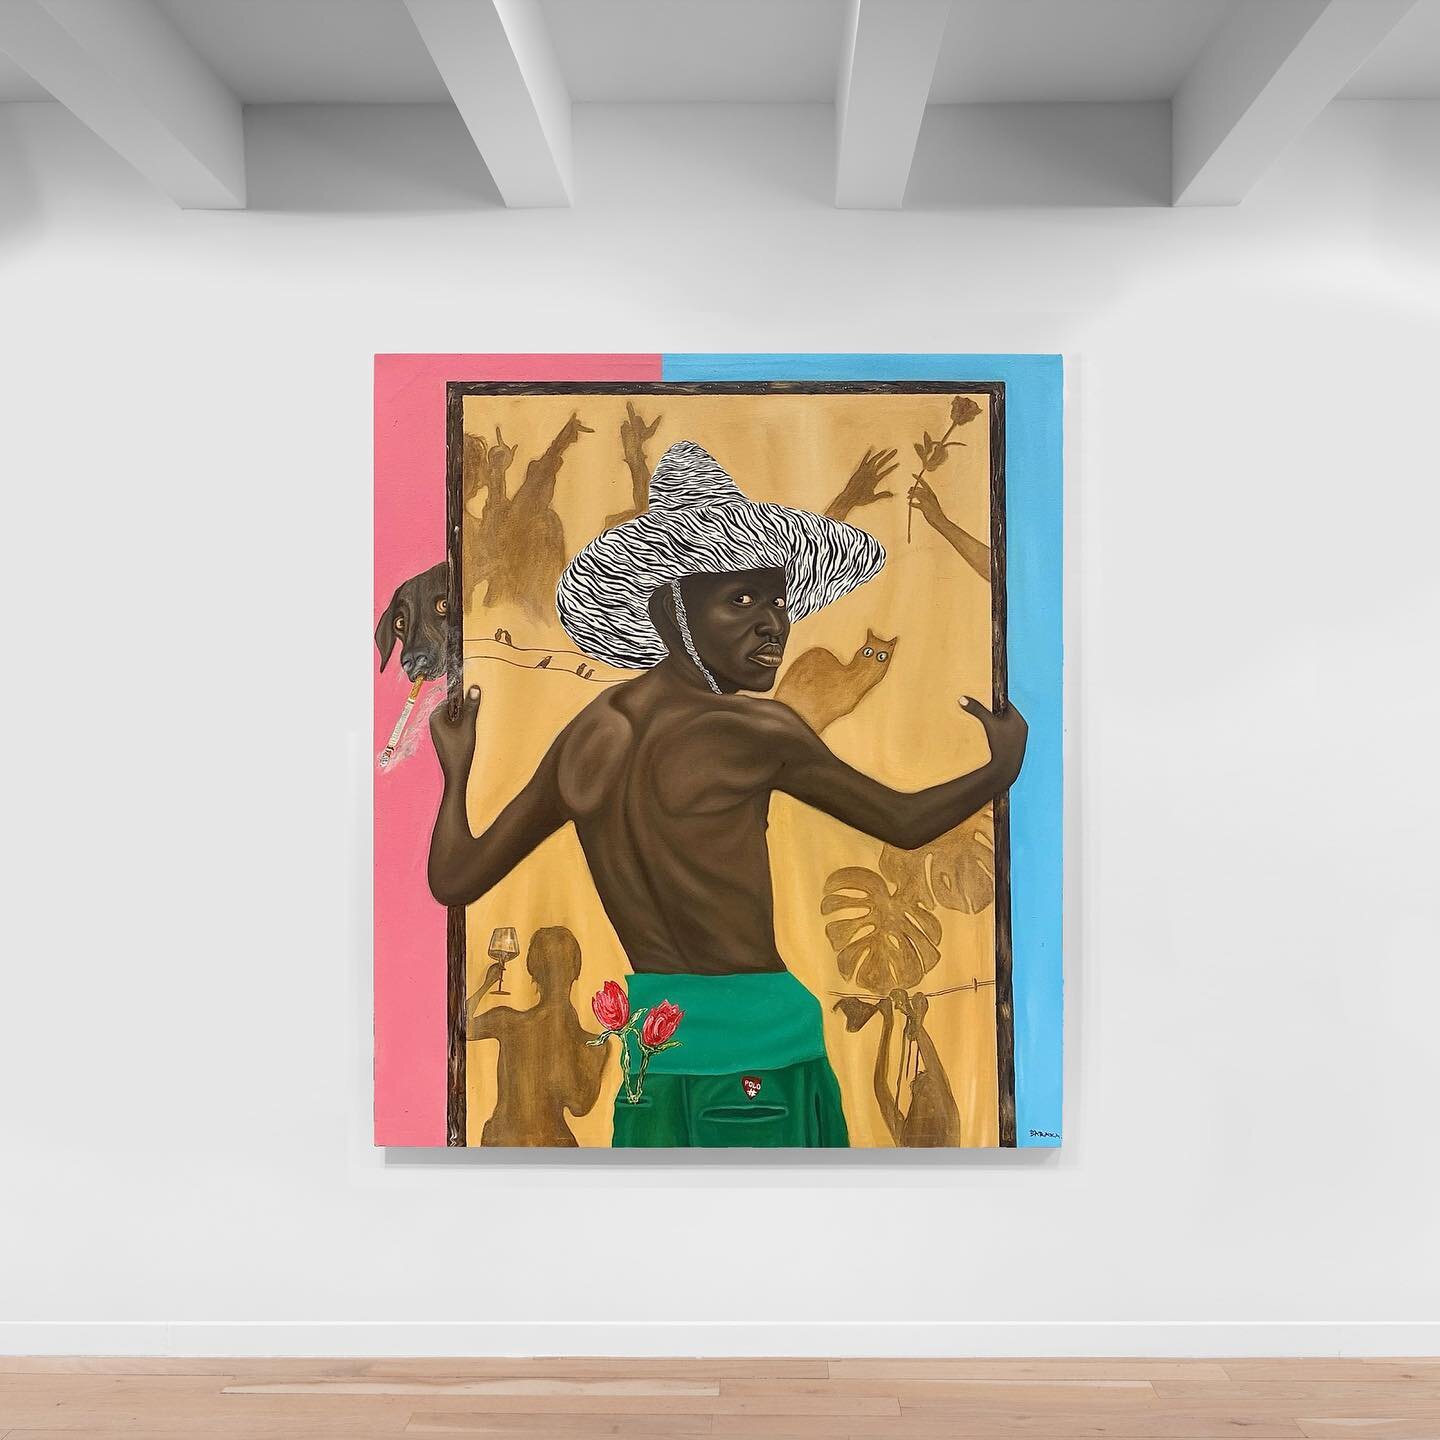 Last Saturday &ldquo;A Time Like This&rdquo;, Solo Exhibition by @joseph_munyao_baraka_art concluded its run at @room57gallery. His back turned towards the viewer, the protagonist of 'Youth Memories' holds up a painting depicting recollections, perha